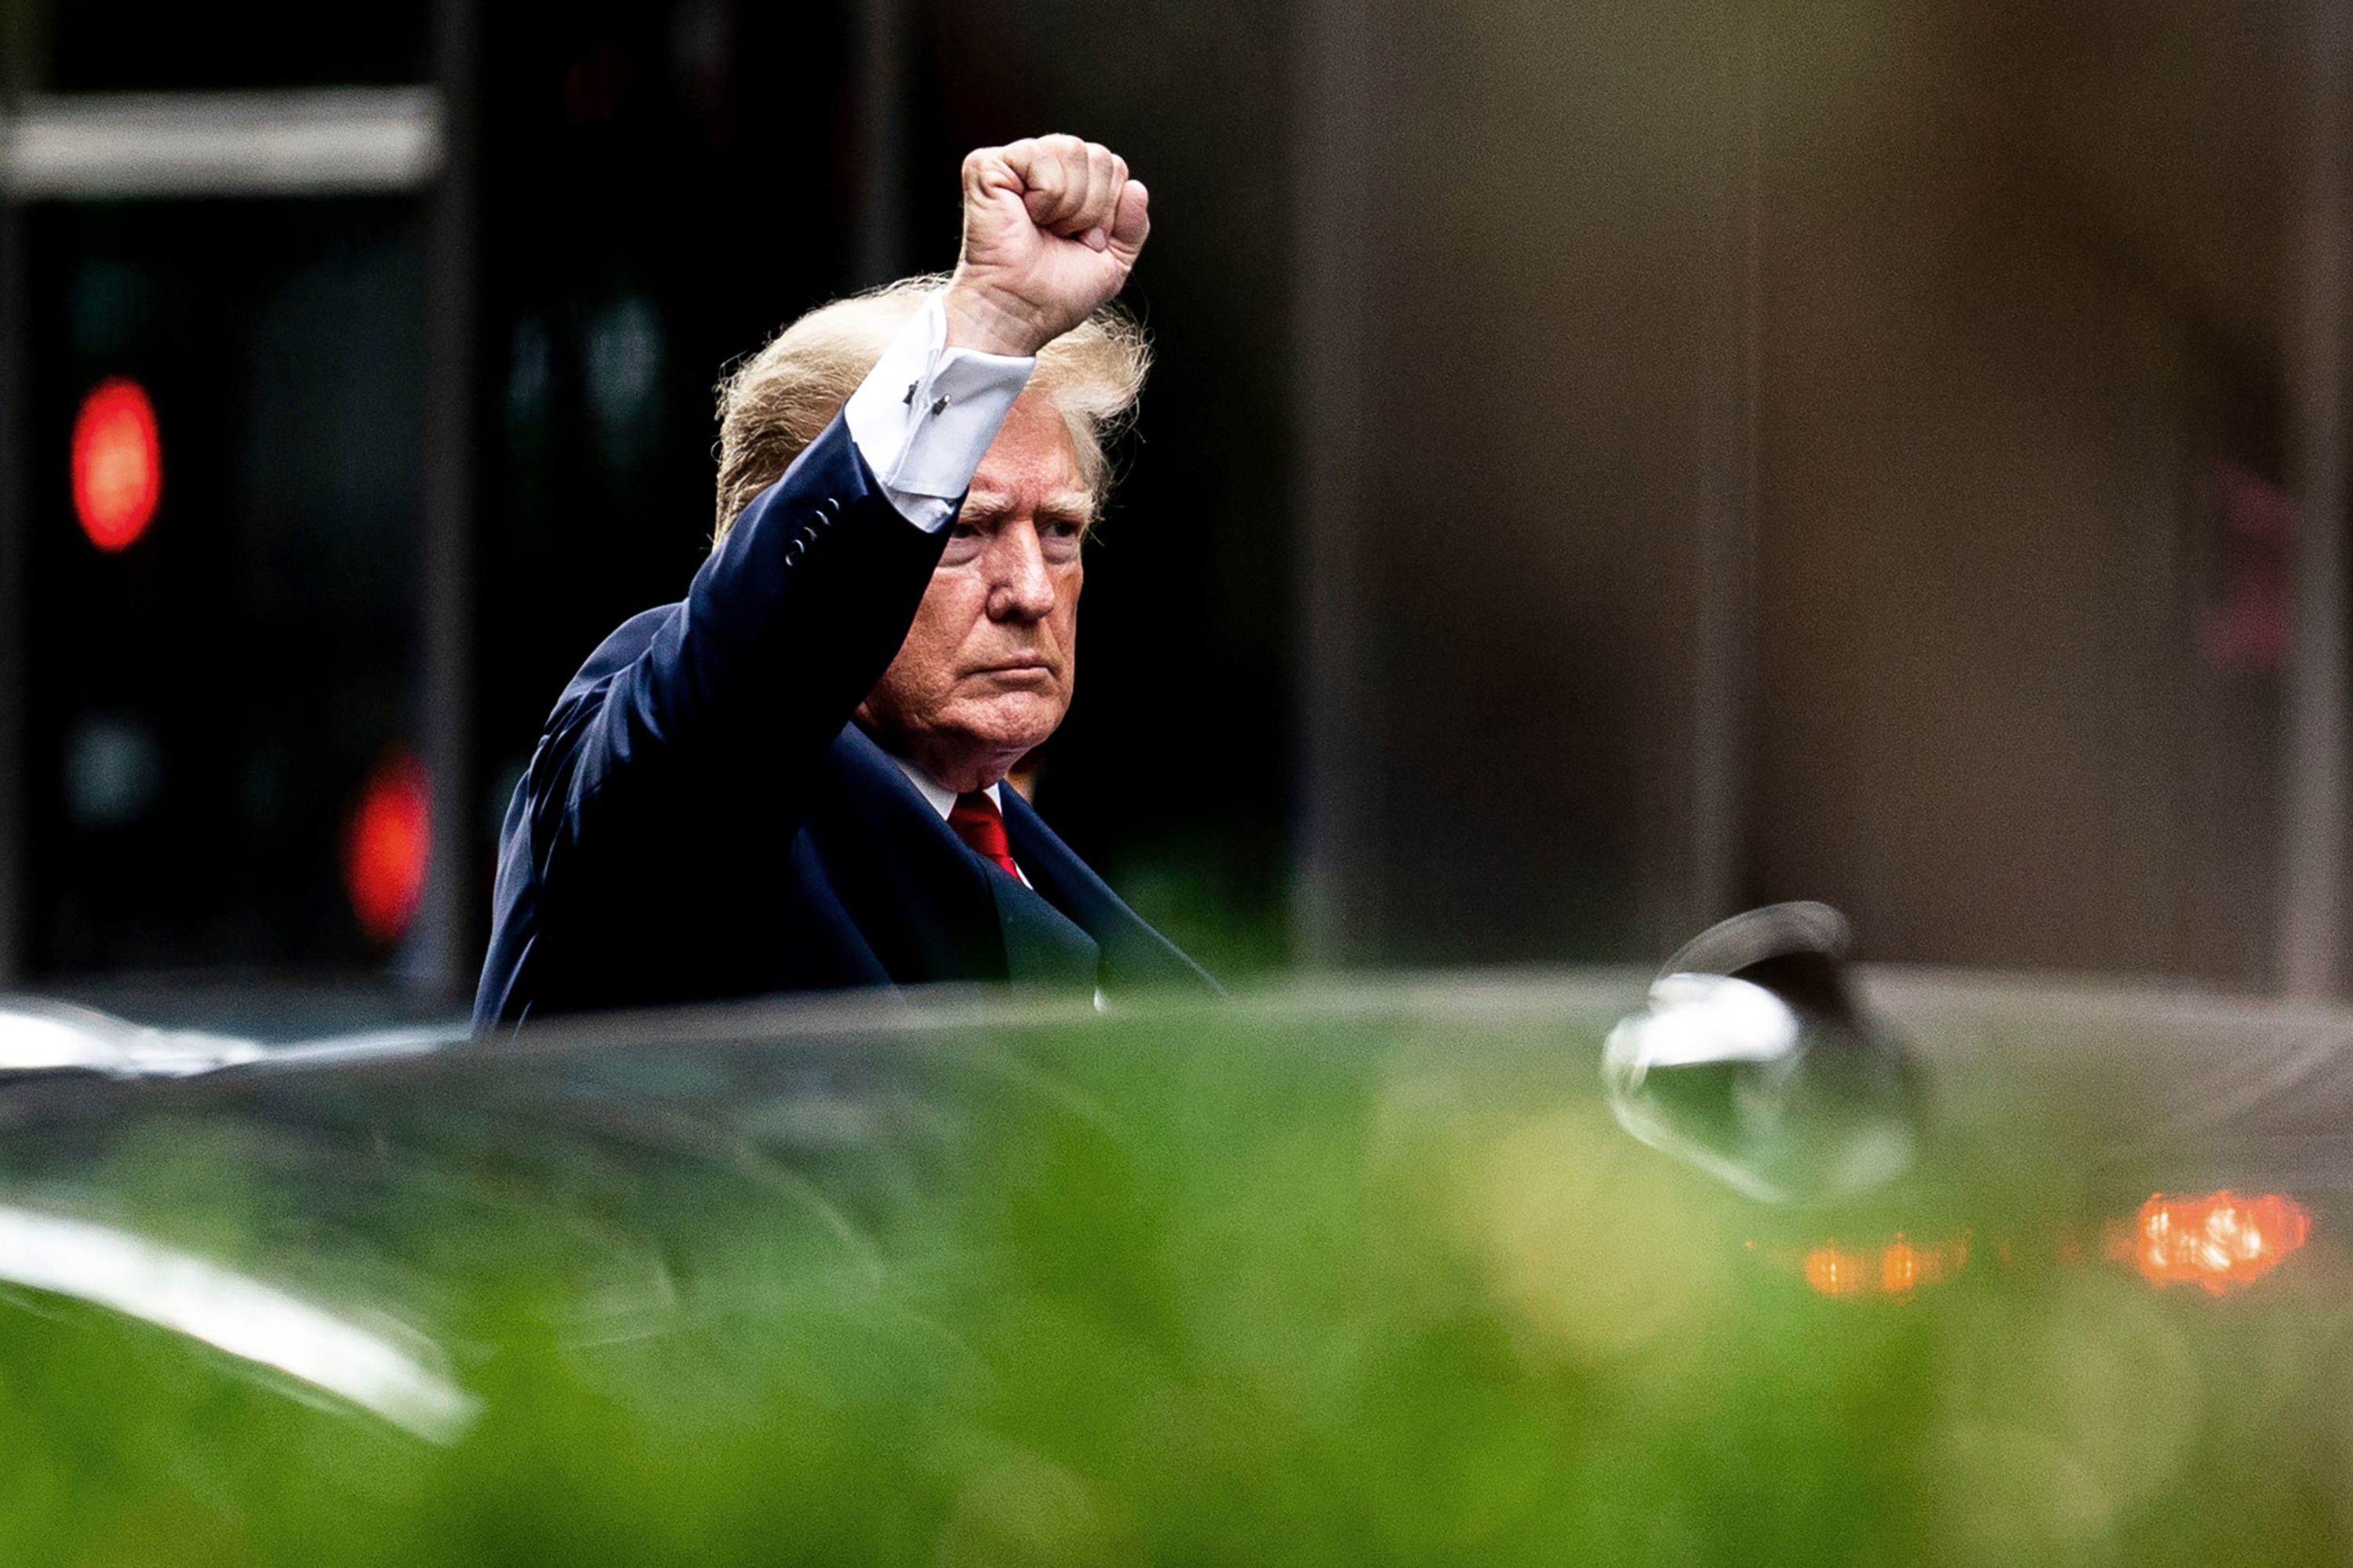 Former US President Donald Trump gestures as he departs Trump Tower in New York on Wednesday, August 10. He was on his way to a scheduled deposition, where he <a href="https://www.cnn.com/2022/08/10/politics/trump-deposition-ny-attorney-general/index.html" target="_blank">invoked his Fifth Amendment rights</a> and declined to answer questions from the New York attorney general.